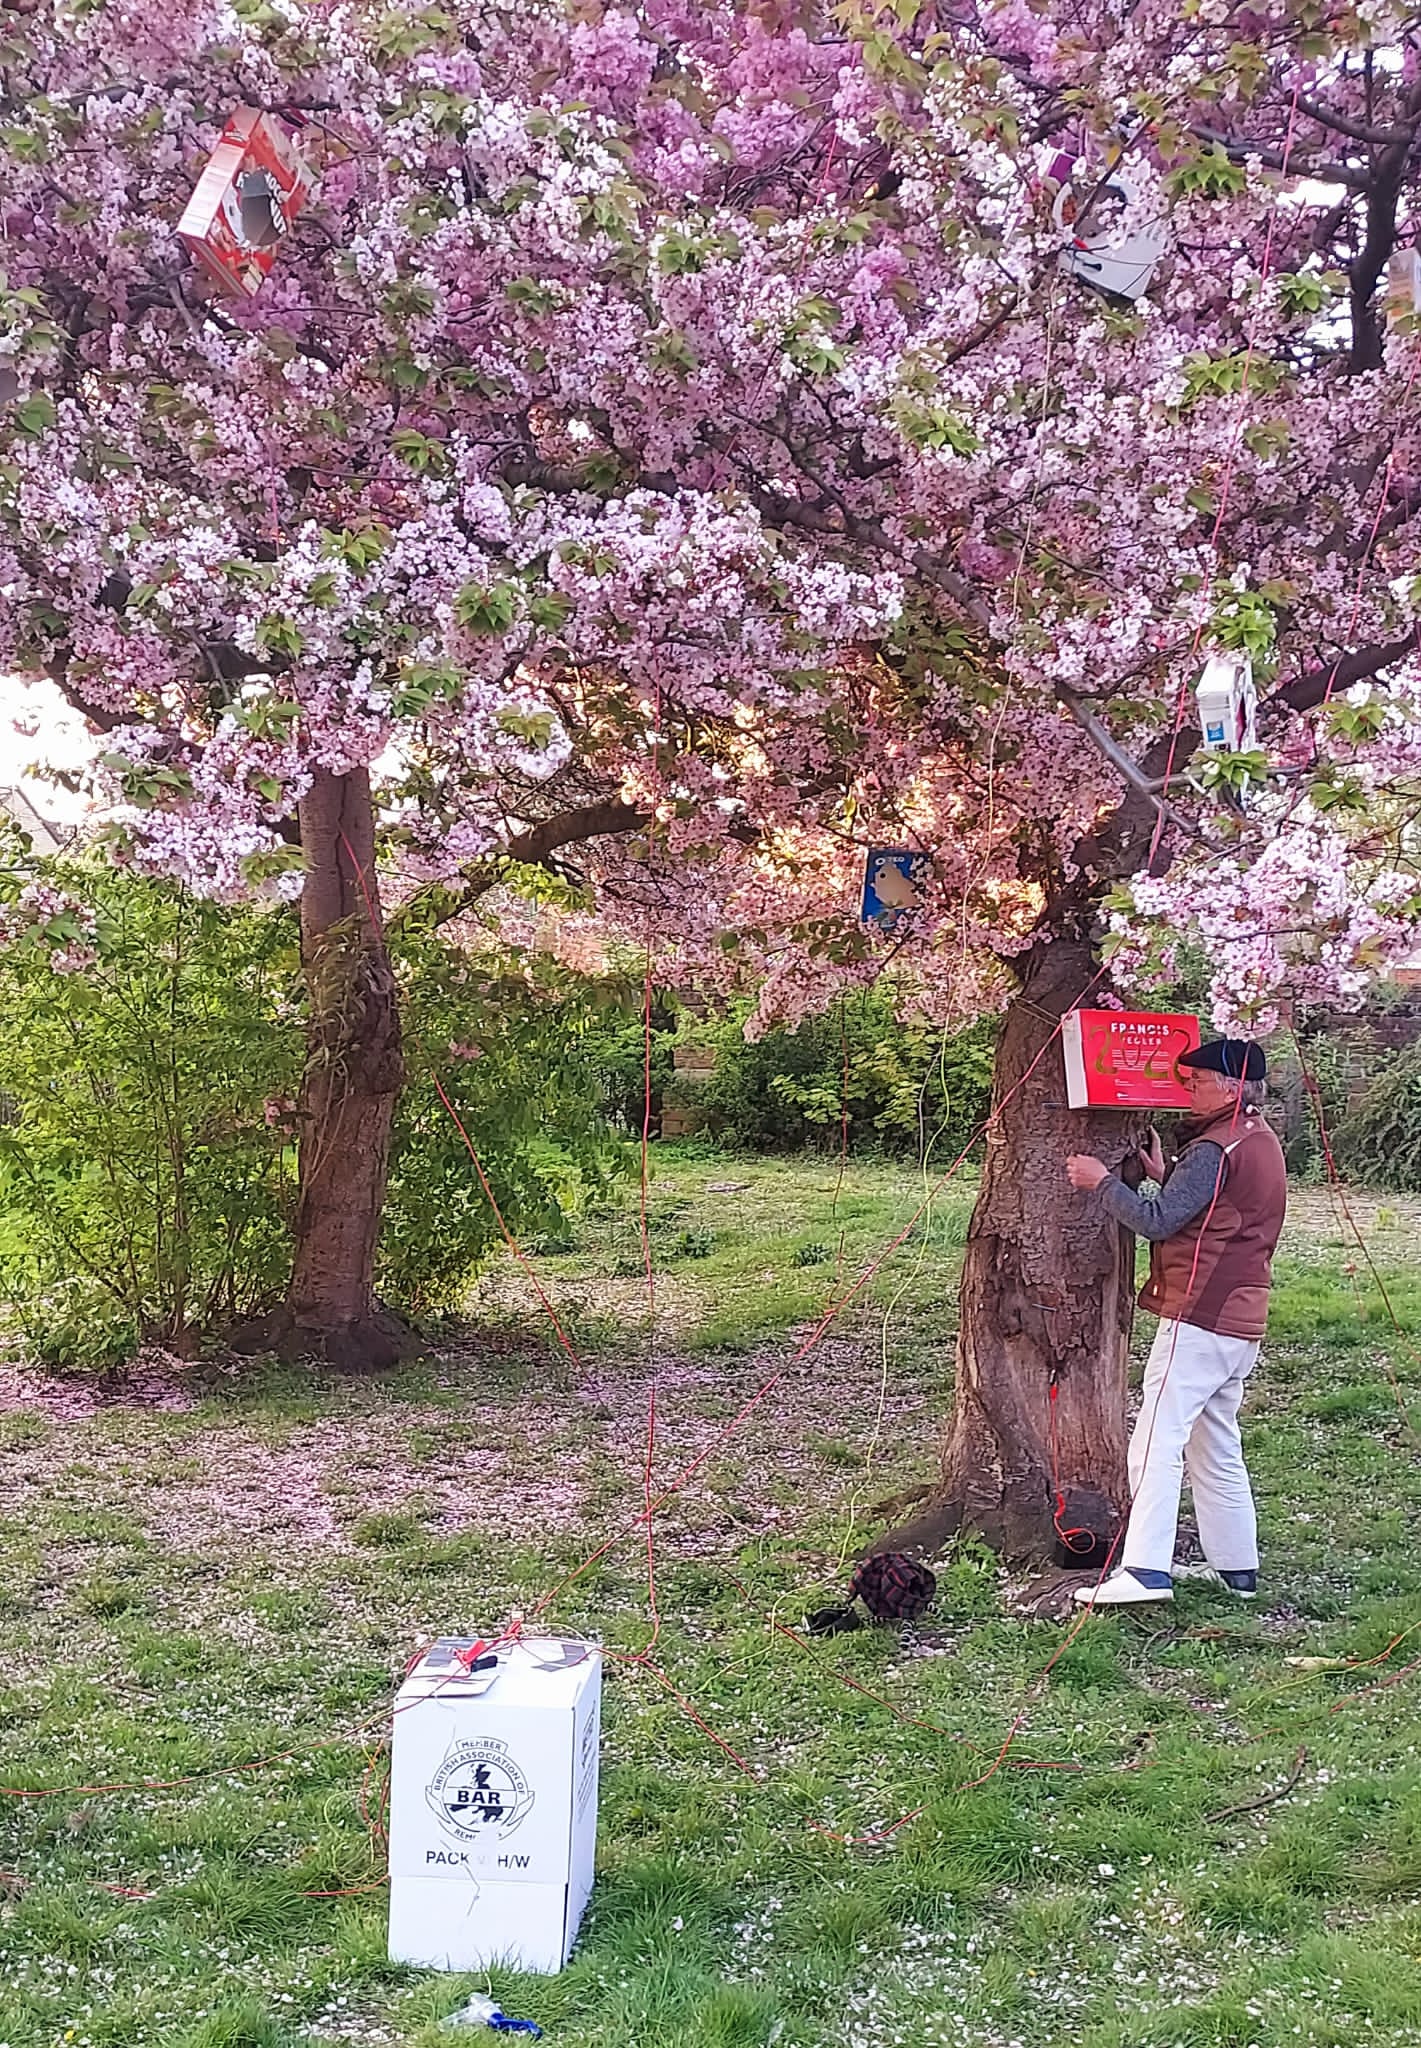 Frank fixing a red box with 2022 cut out to the trunk of a blossom tree with pink blossoms and a white box with a hand generator in front